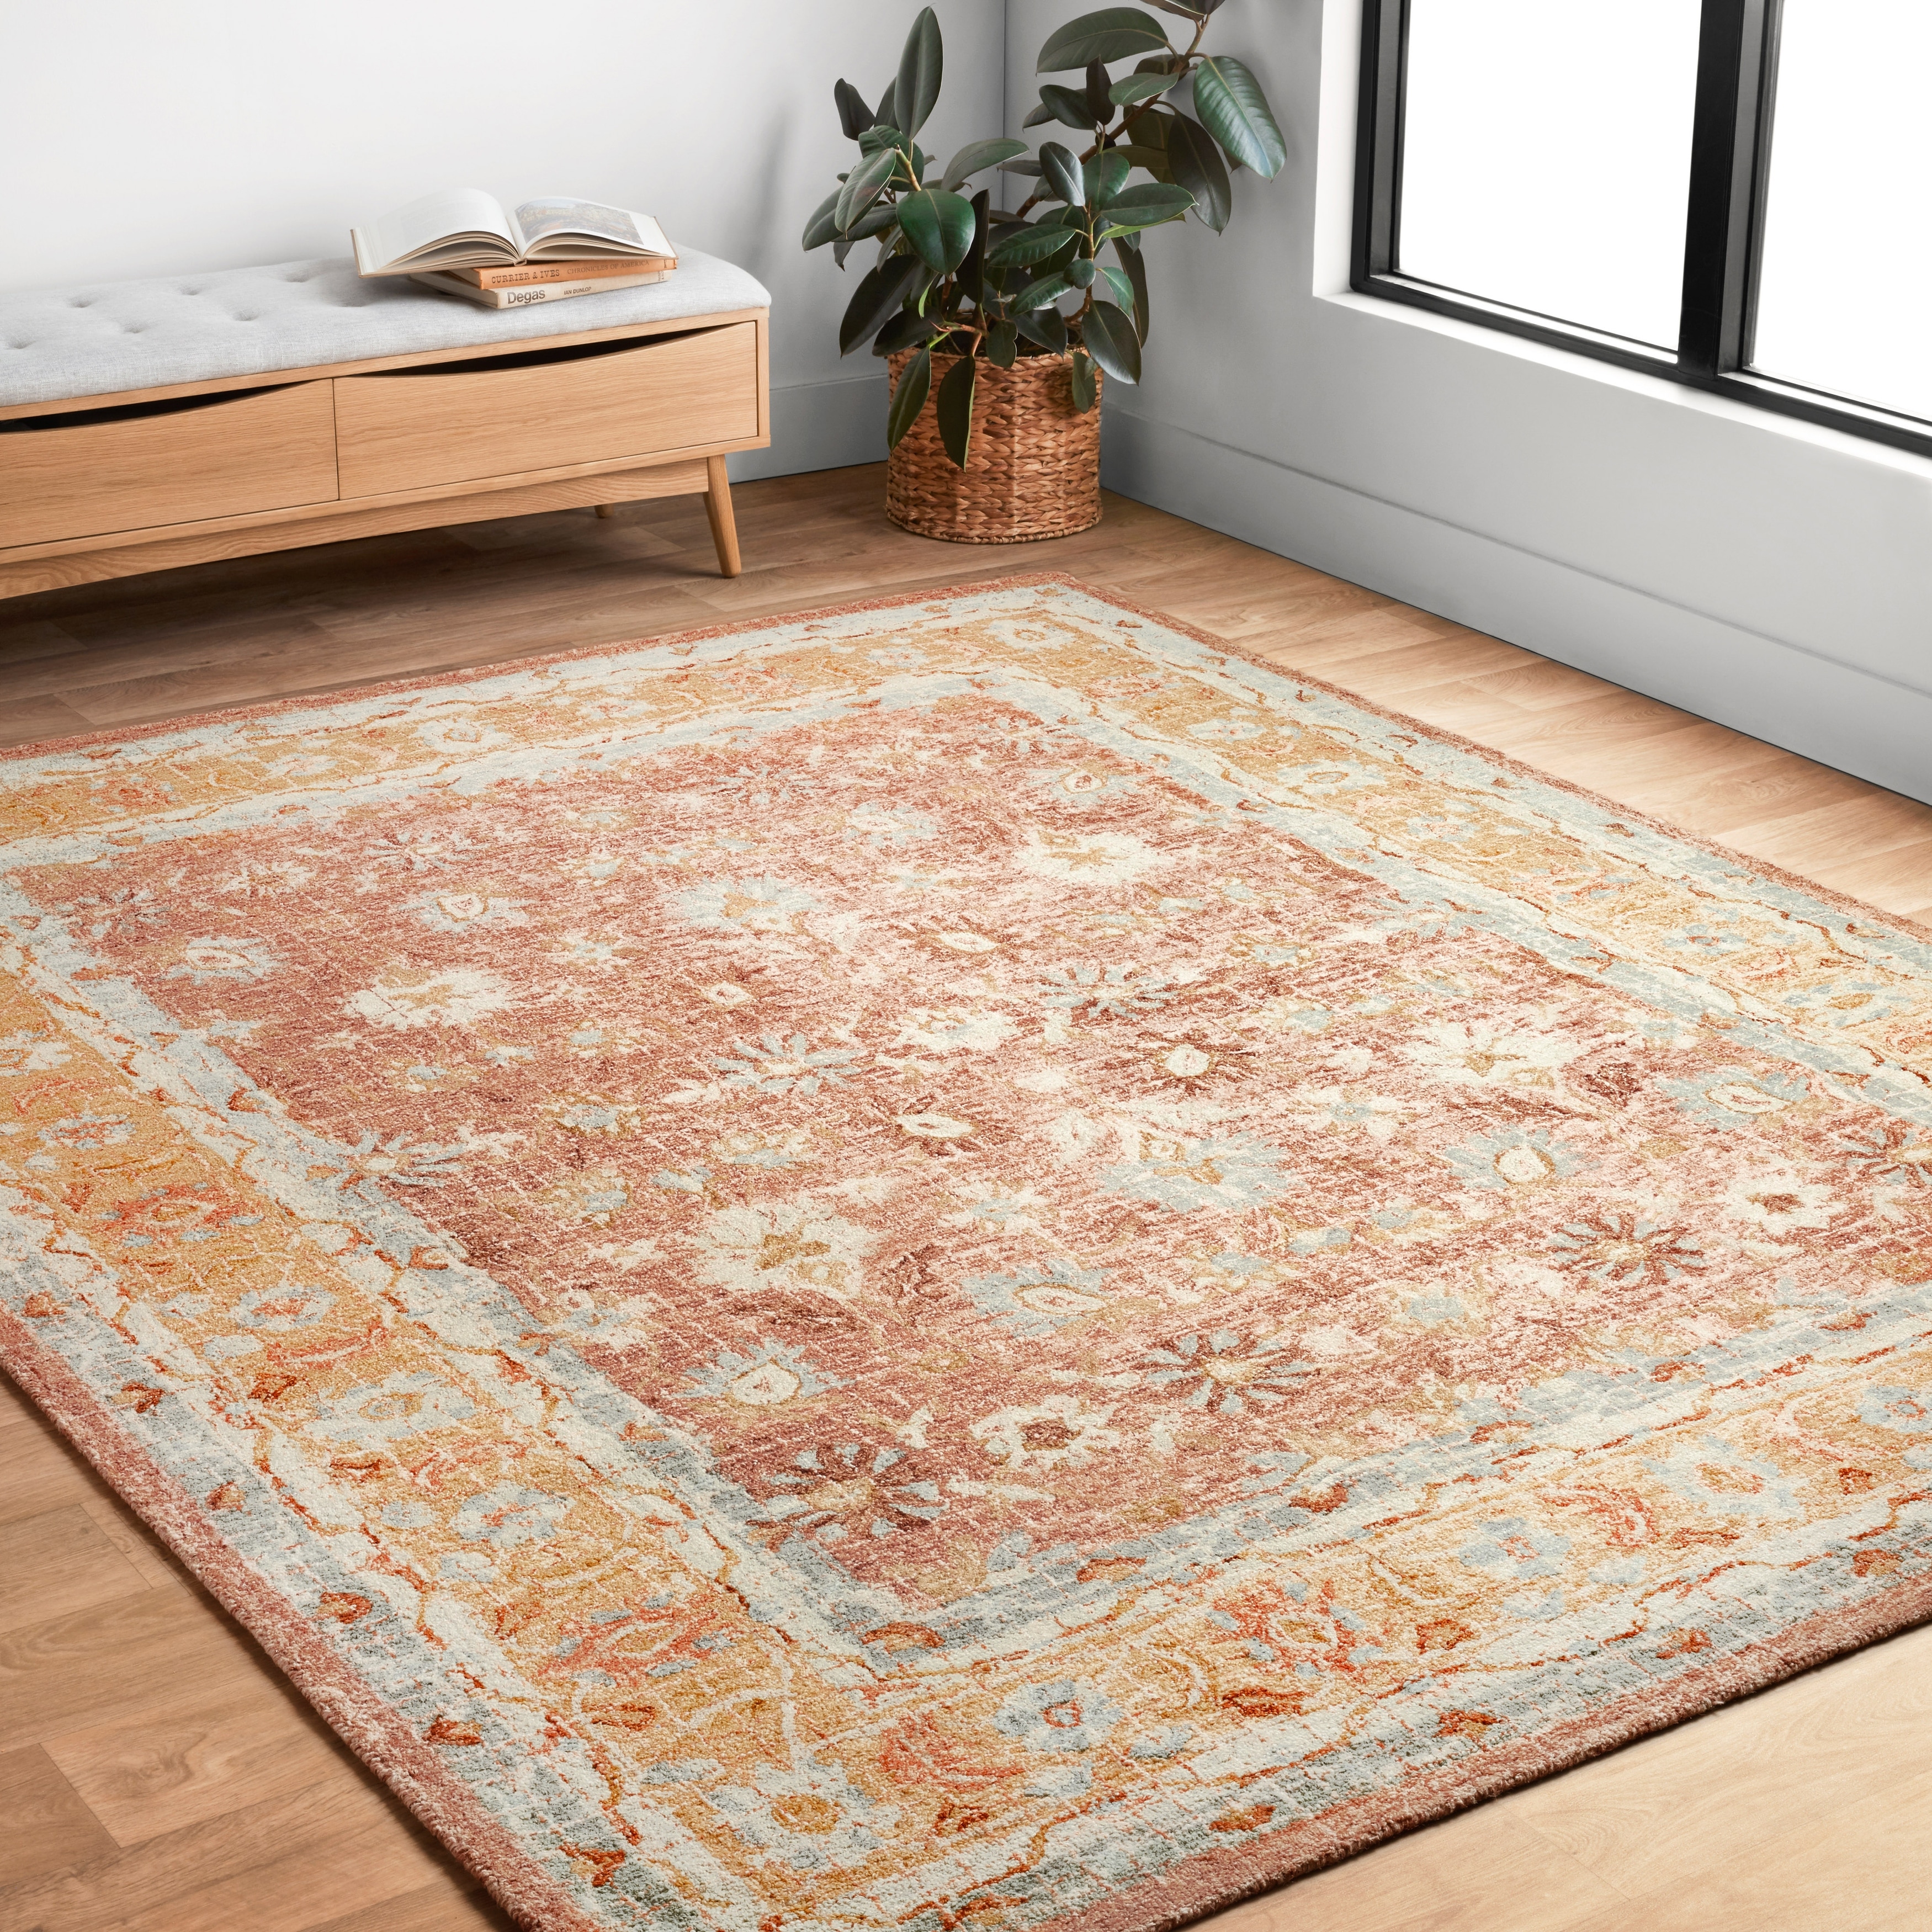 https://ak1.ostkcdn.com/images/products/is/images/direct/afa5f9e9a89b7bb99d66d3d6e8f8df6487c3ce5e/Hand-hooked-Traditional-Rust--Gold-Mosaic-Wool-Rug-%287%279-x-9%279%29.jpg